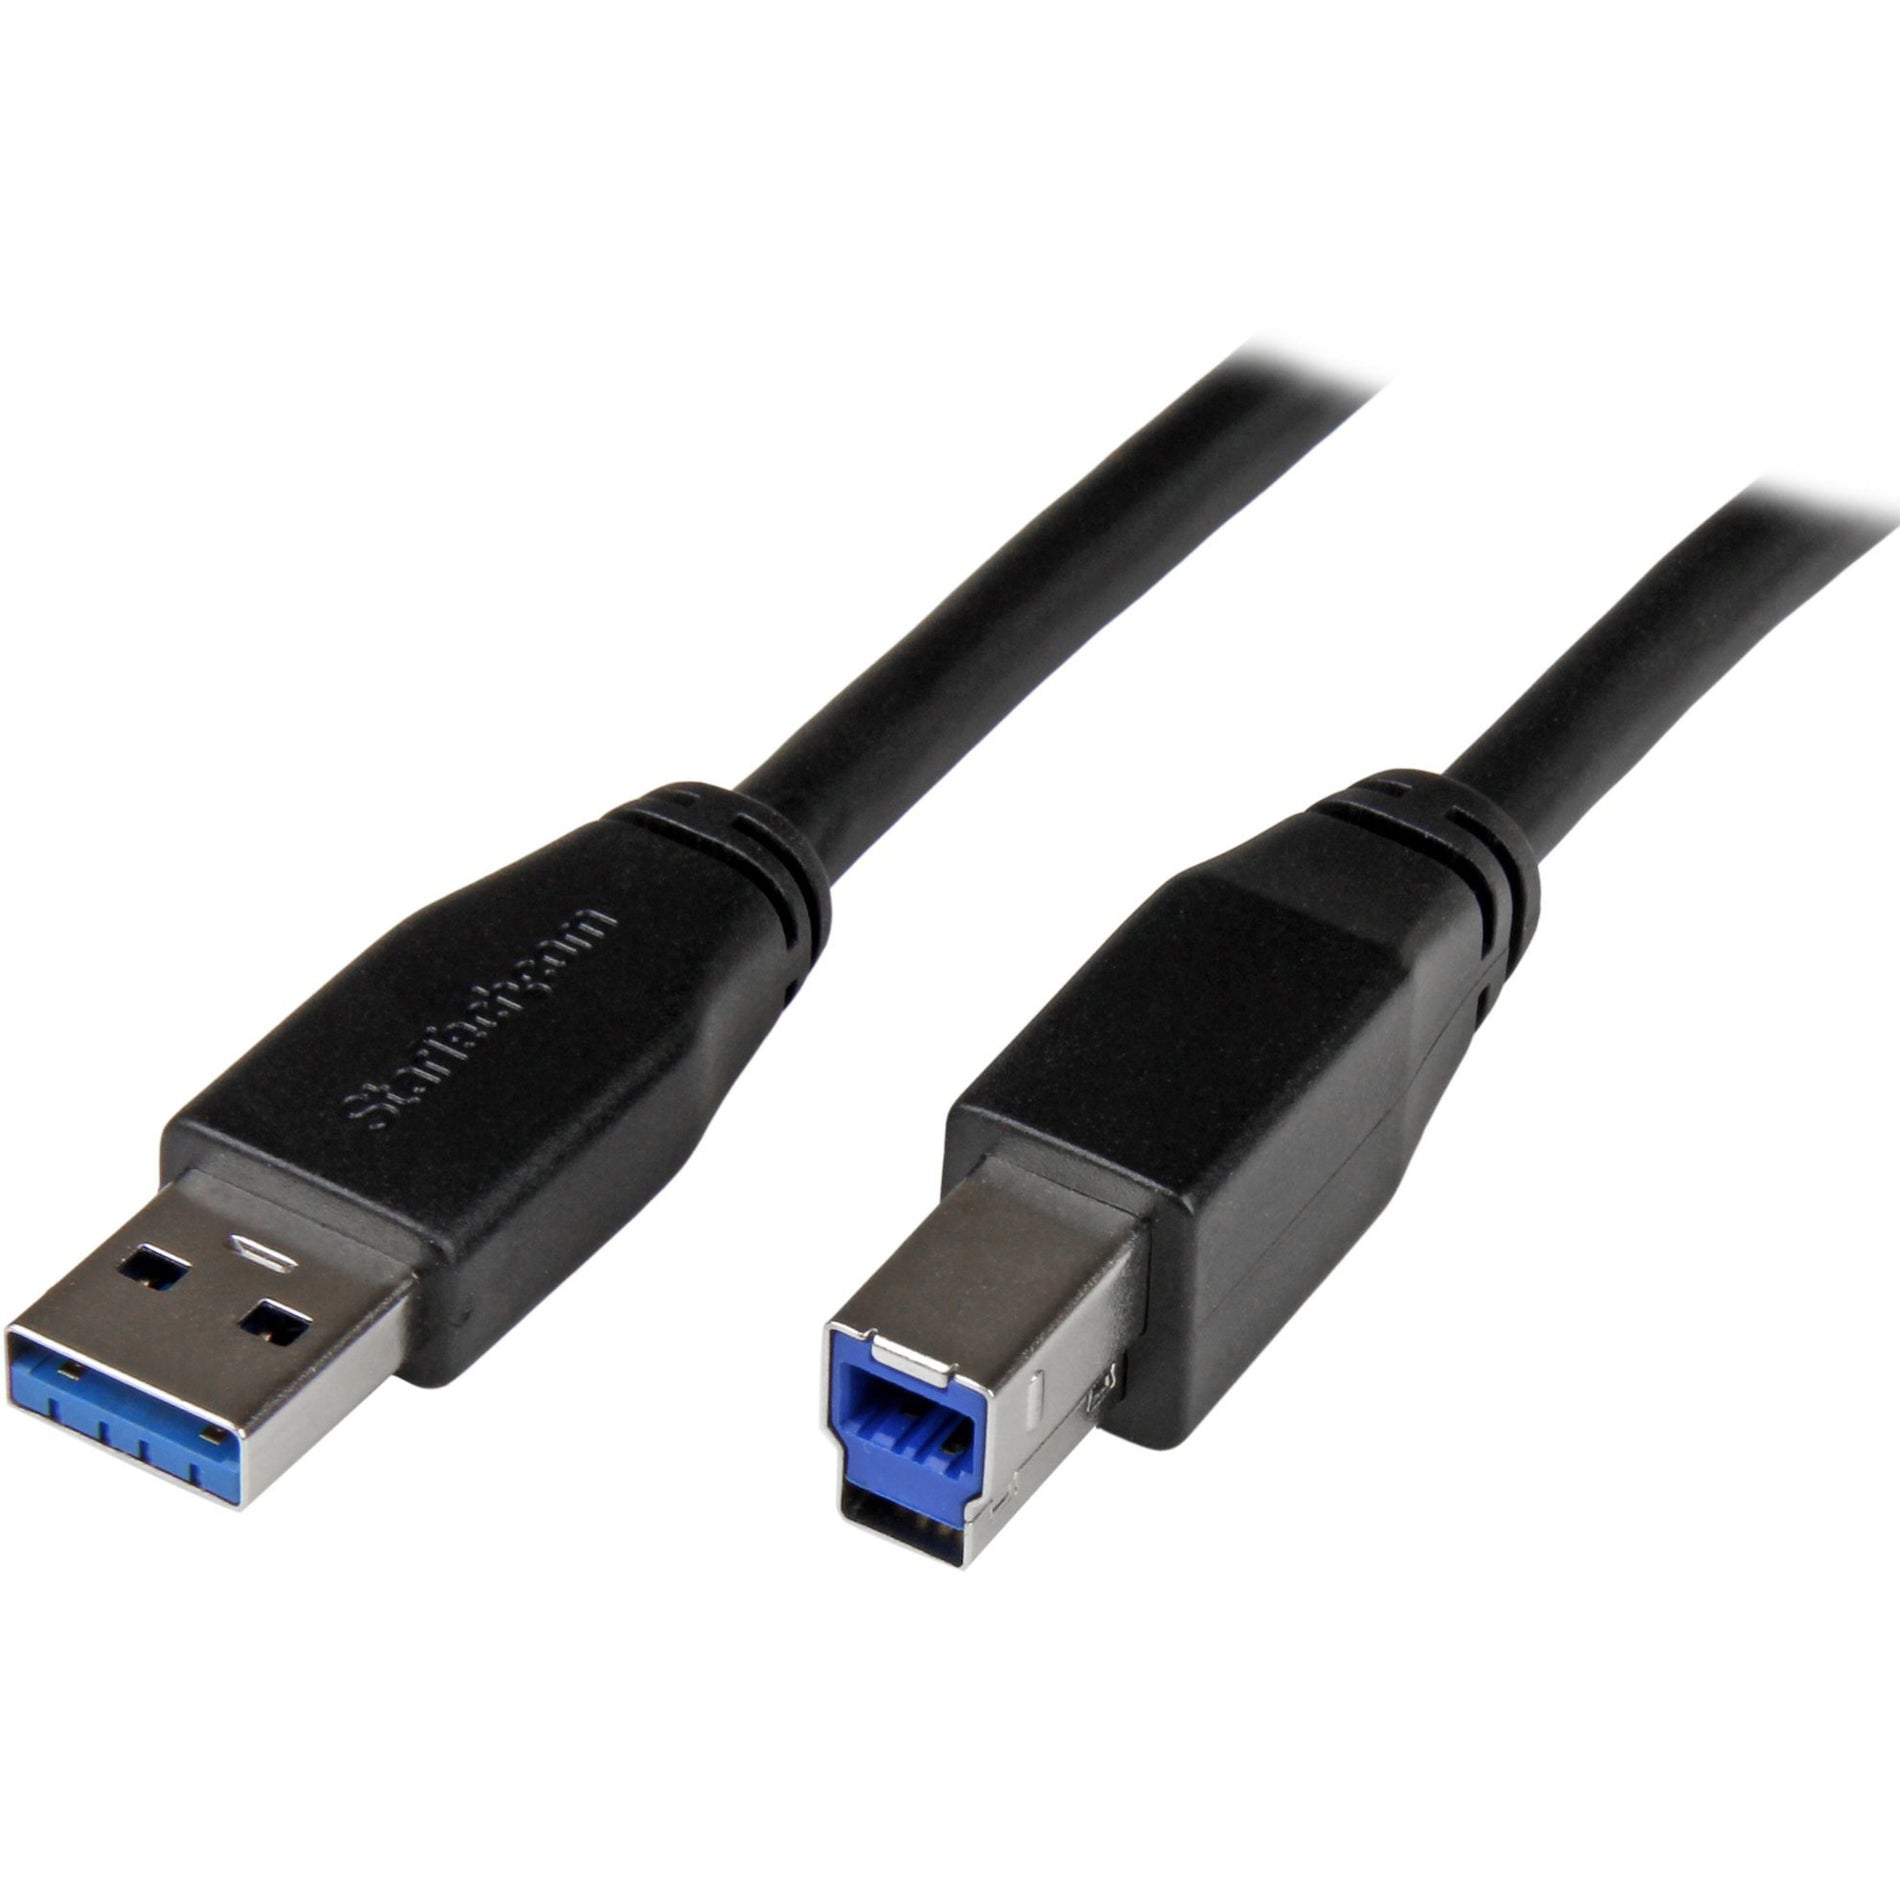 StarTech.com USB3SAB10M Active USB 3.0 USB-A to USB-B Cable - 10m, Data Transfer Cable for Hard Drive, Docking Station, Video Device